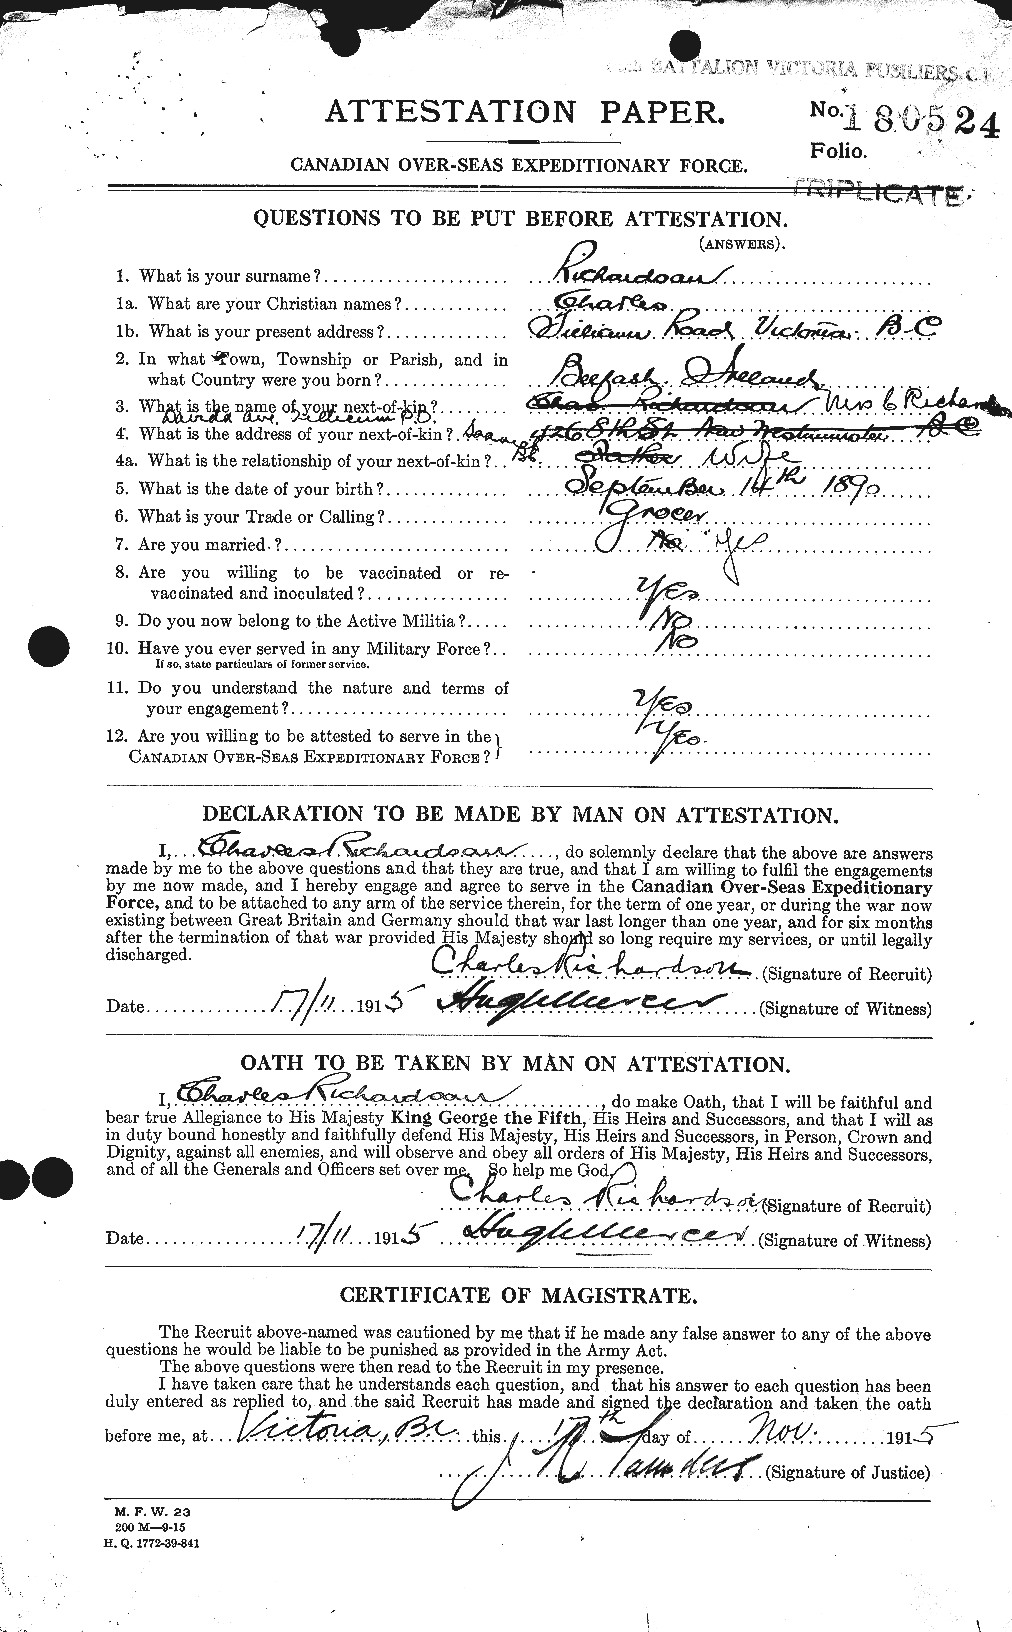 Personnel Records of the First World War - CEF 603540a